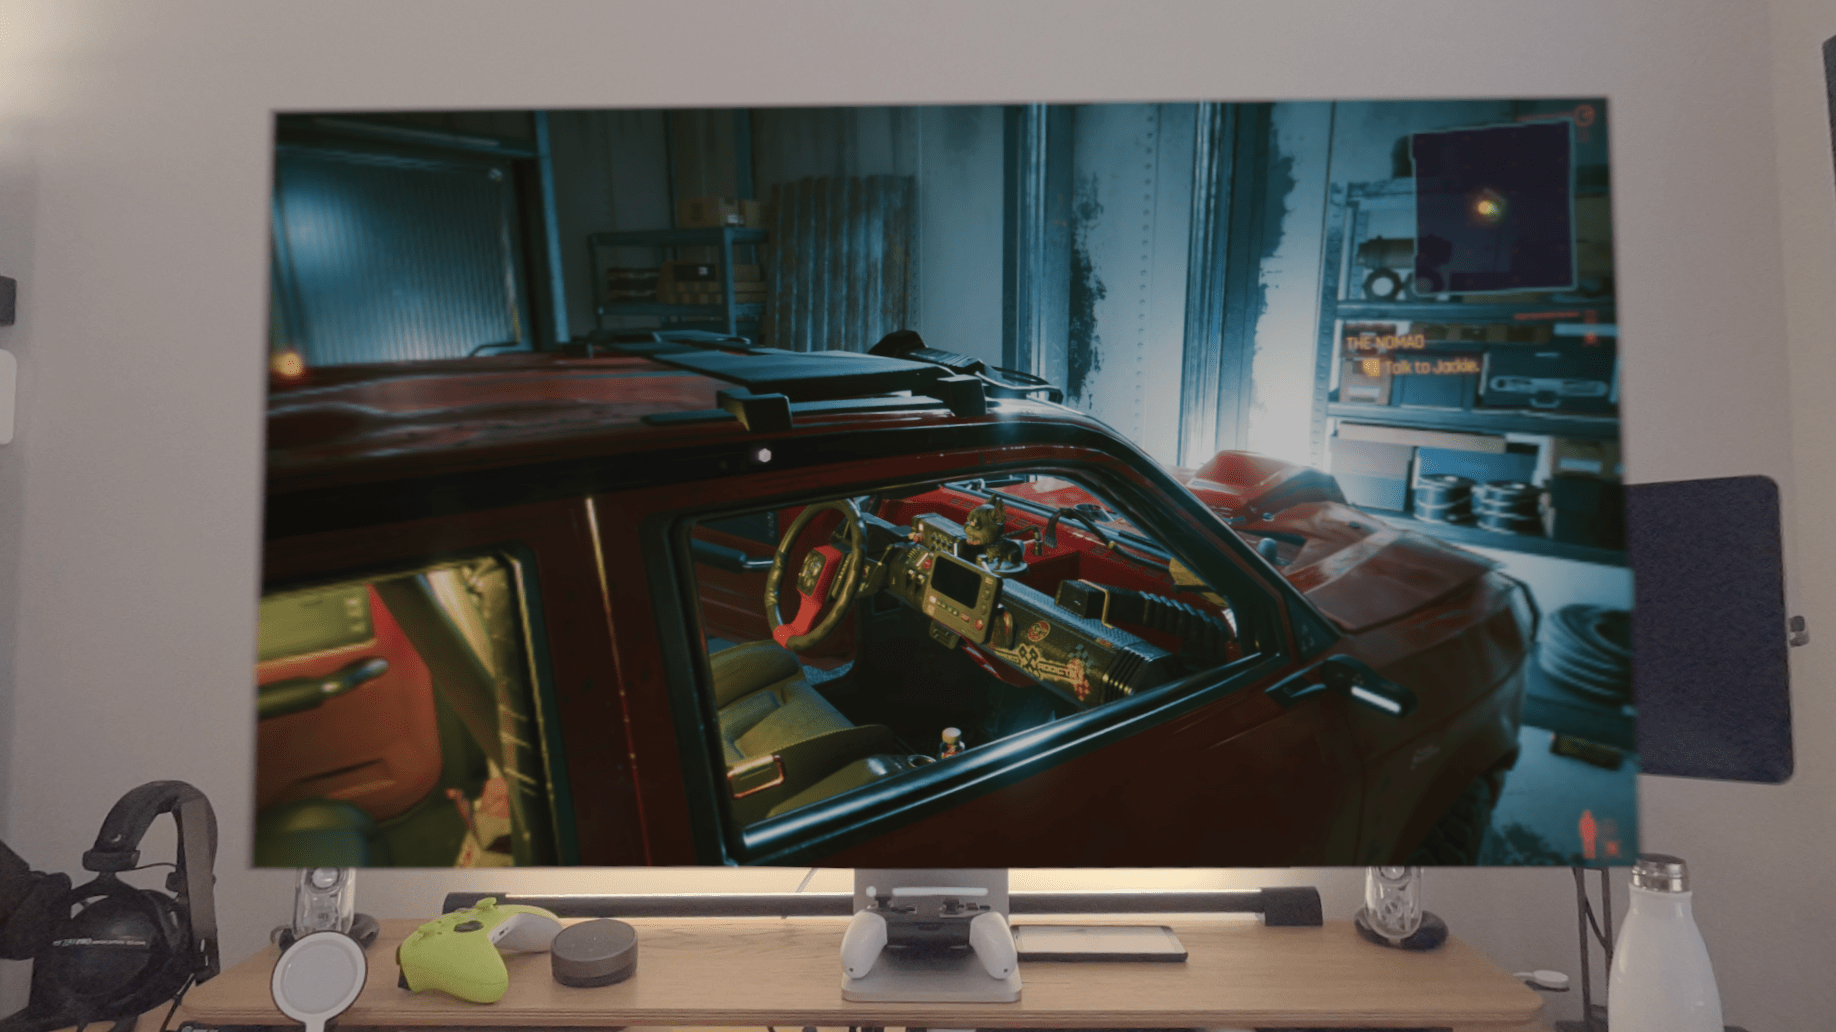 It's impossible to capture well in the Vision Pro, but Cyberpunk 2077 looks great at Ultra graphics settings, with ray tracing turned on, delivering a solid 60fps, which is the Studio Display's maximum.